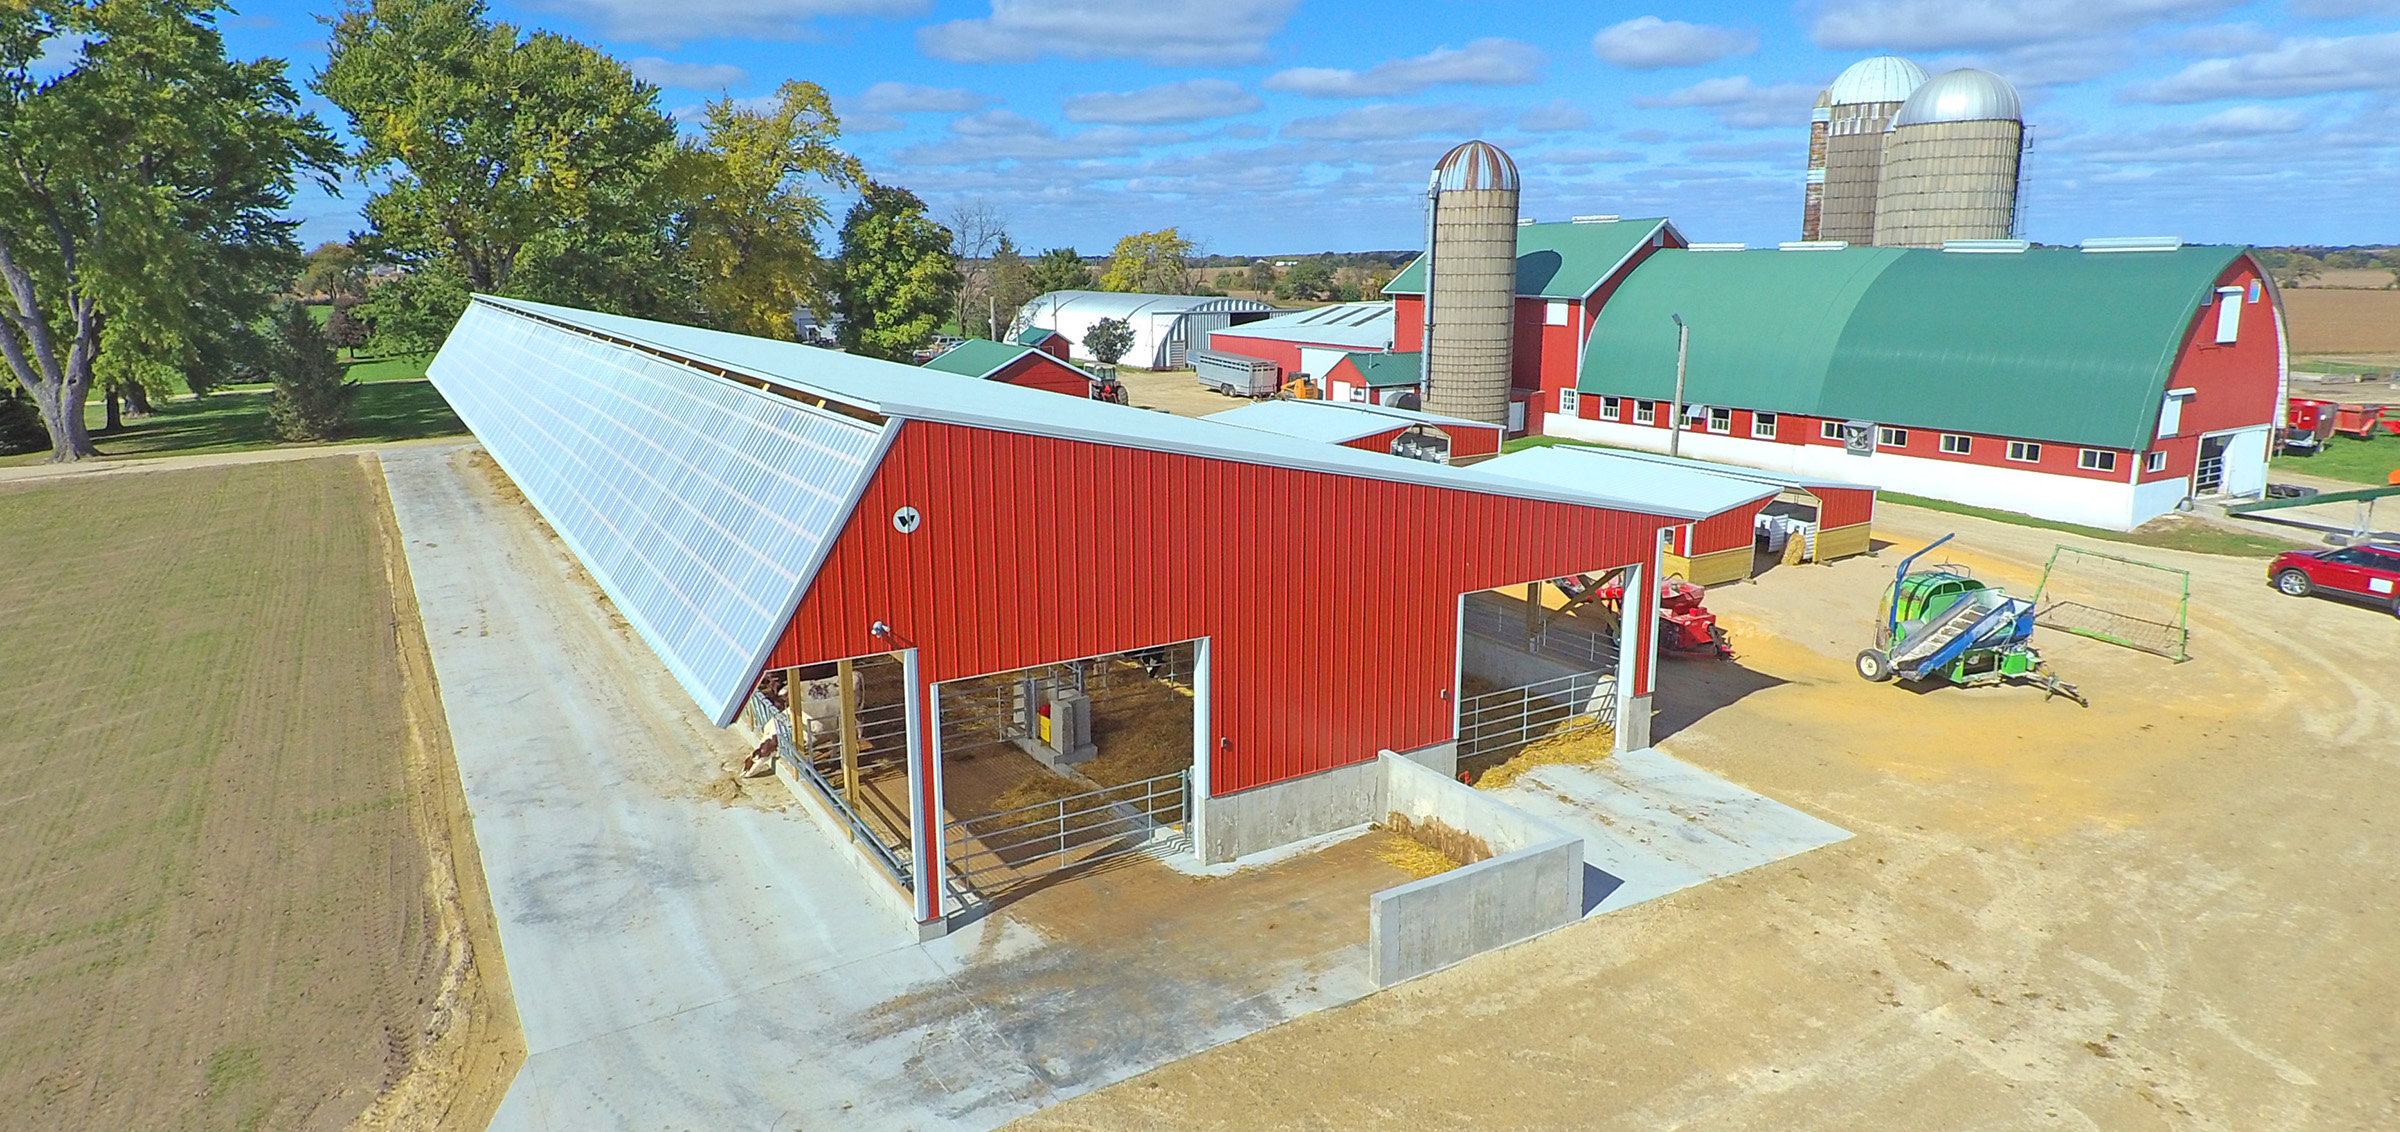 post frame agricultural building showing tractor equipment and a silo